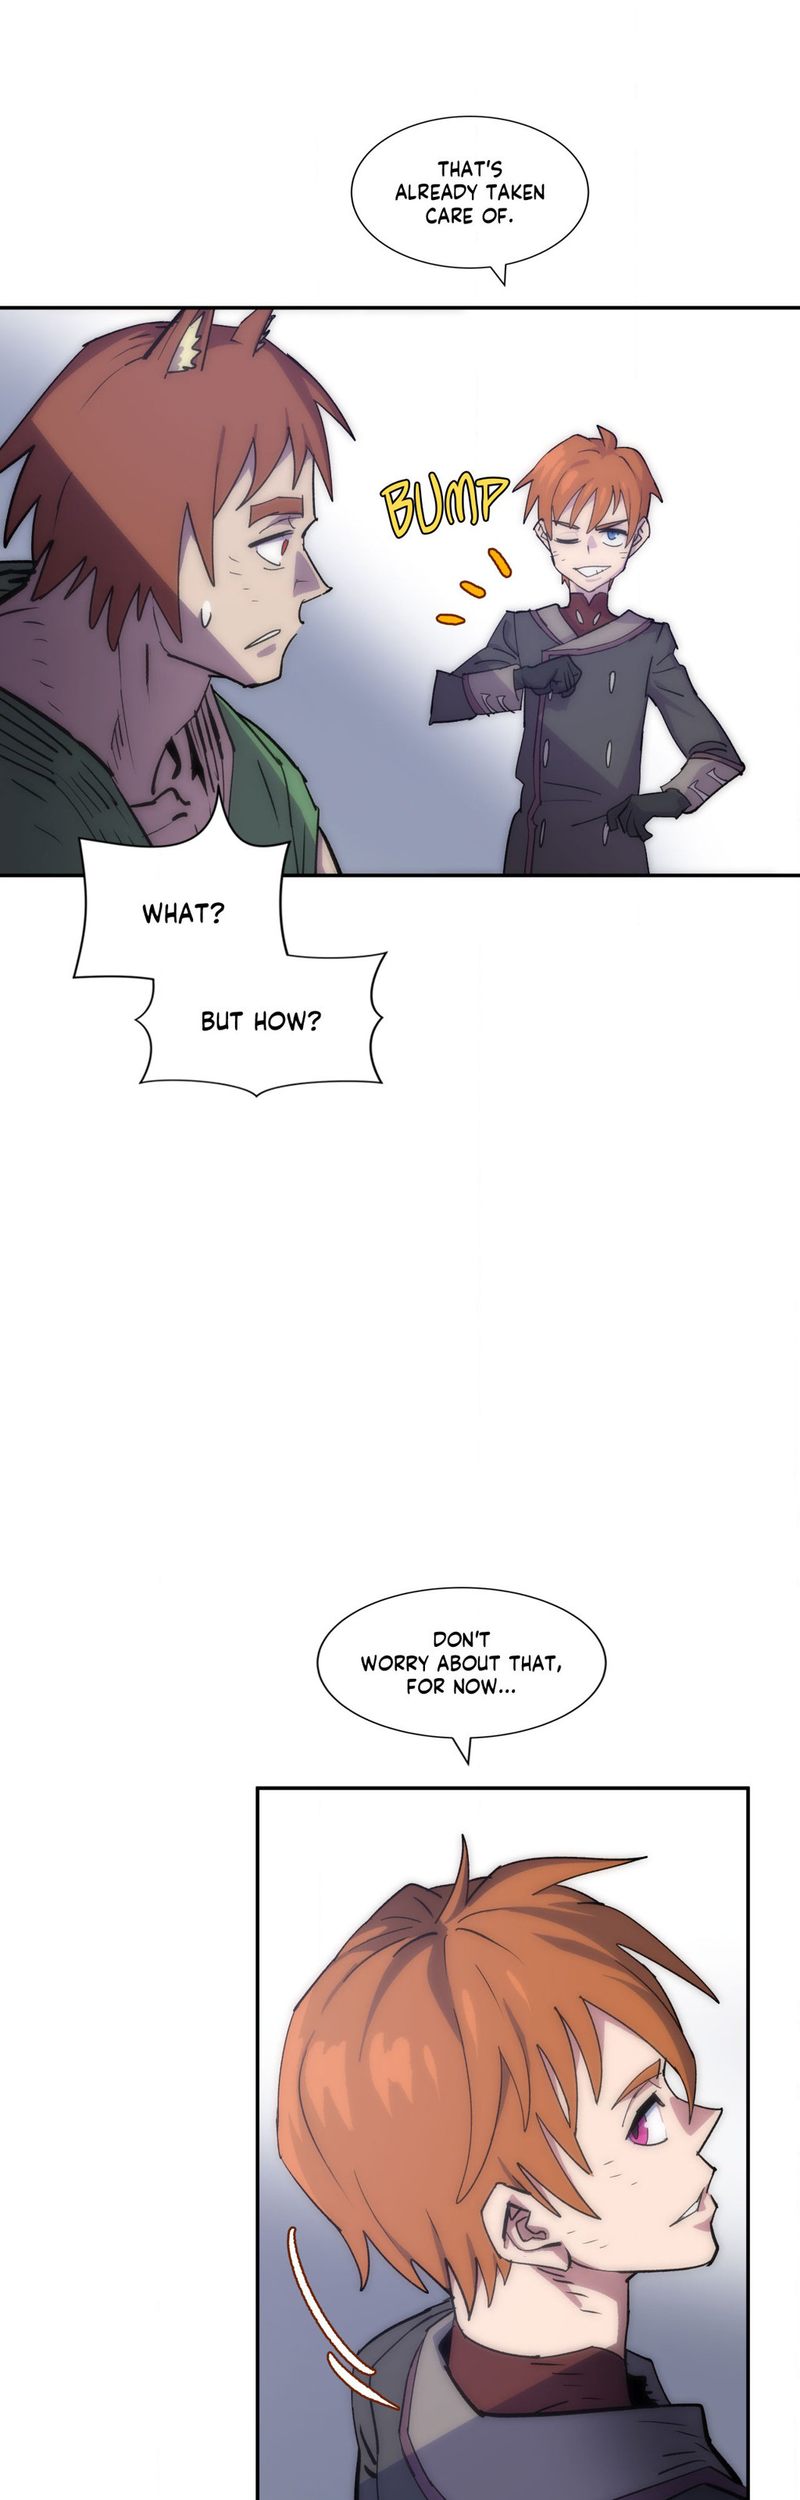 4 Cut Hero - Chapter 229 Page 23